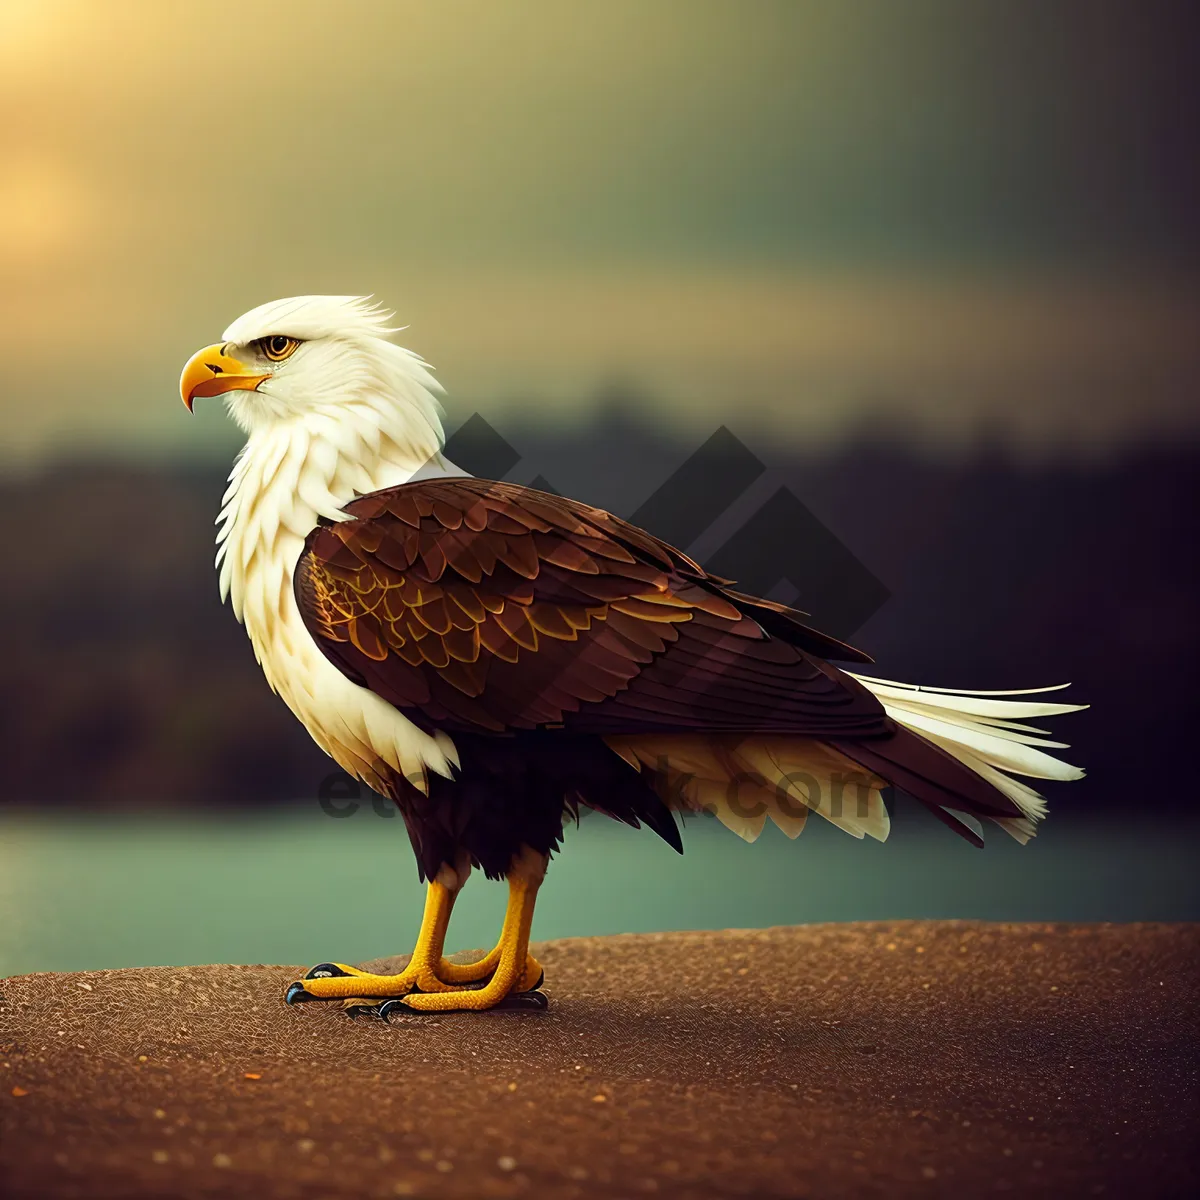 Picture of Magnificent Bald Eagle Soaring in the Wild